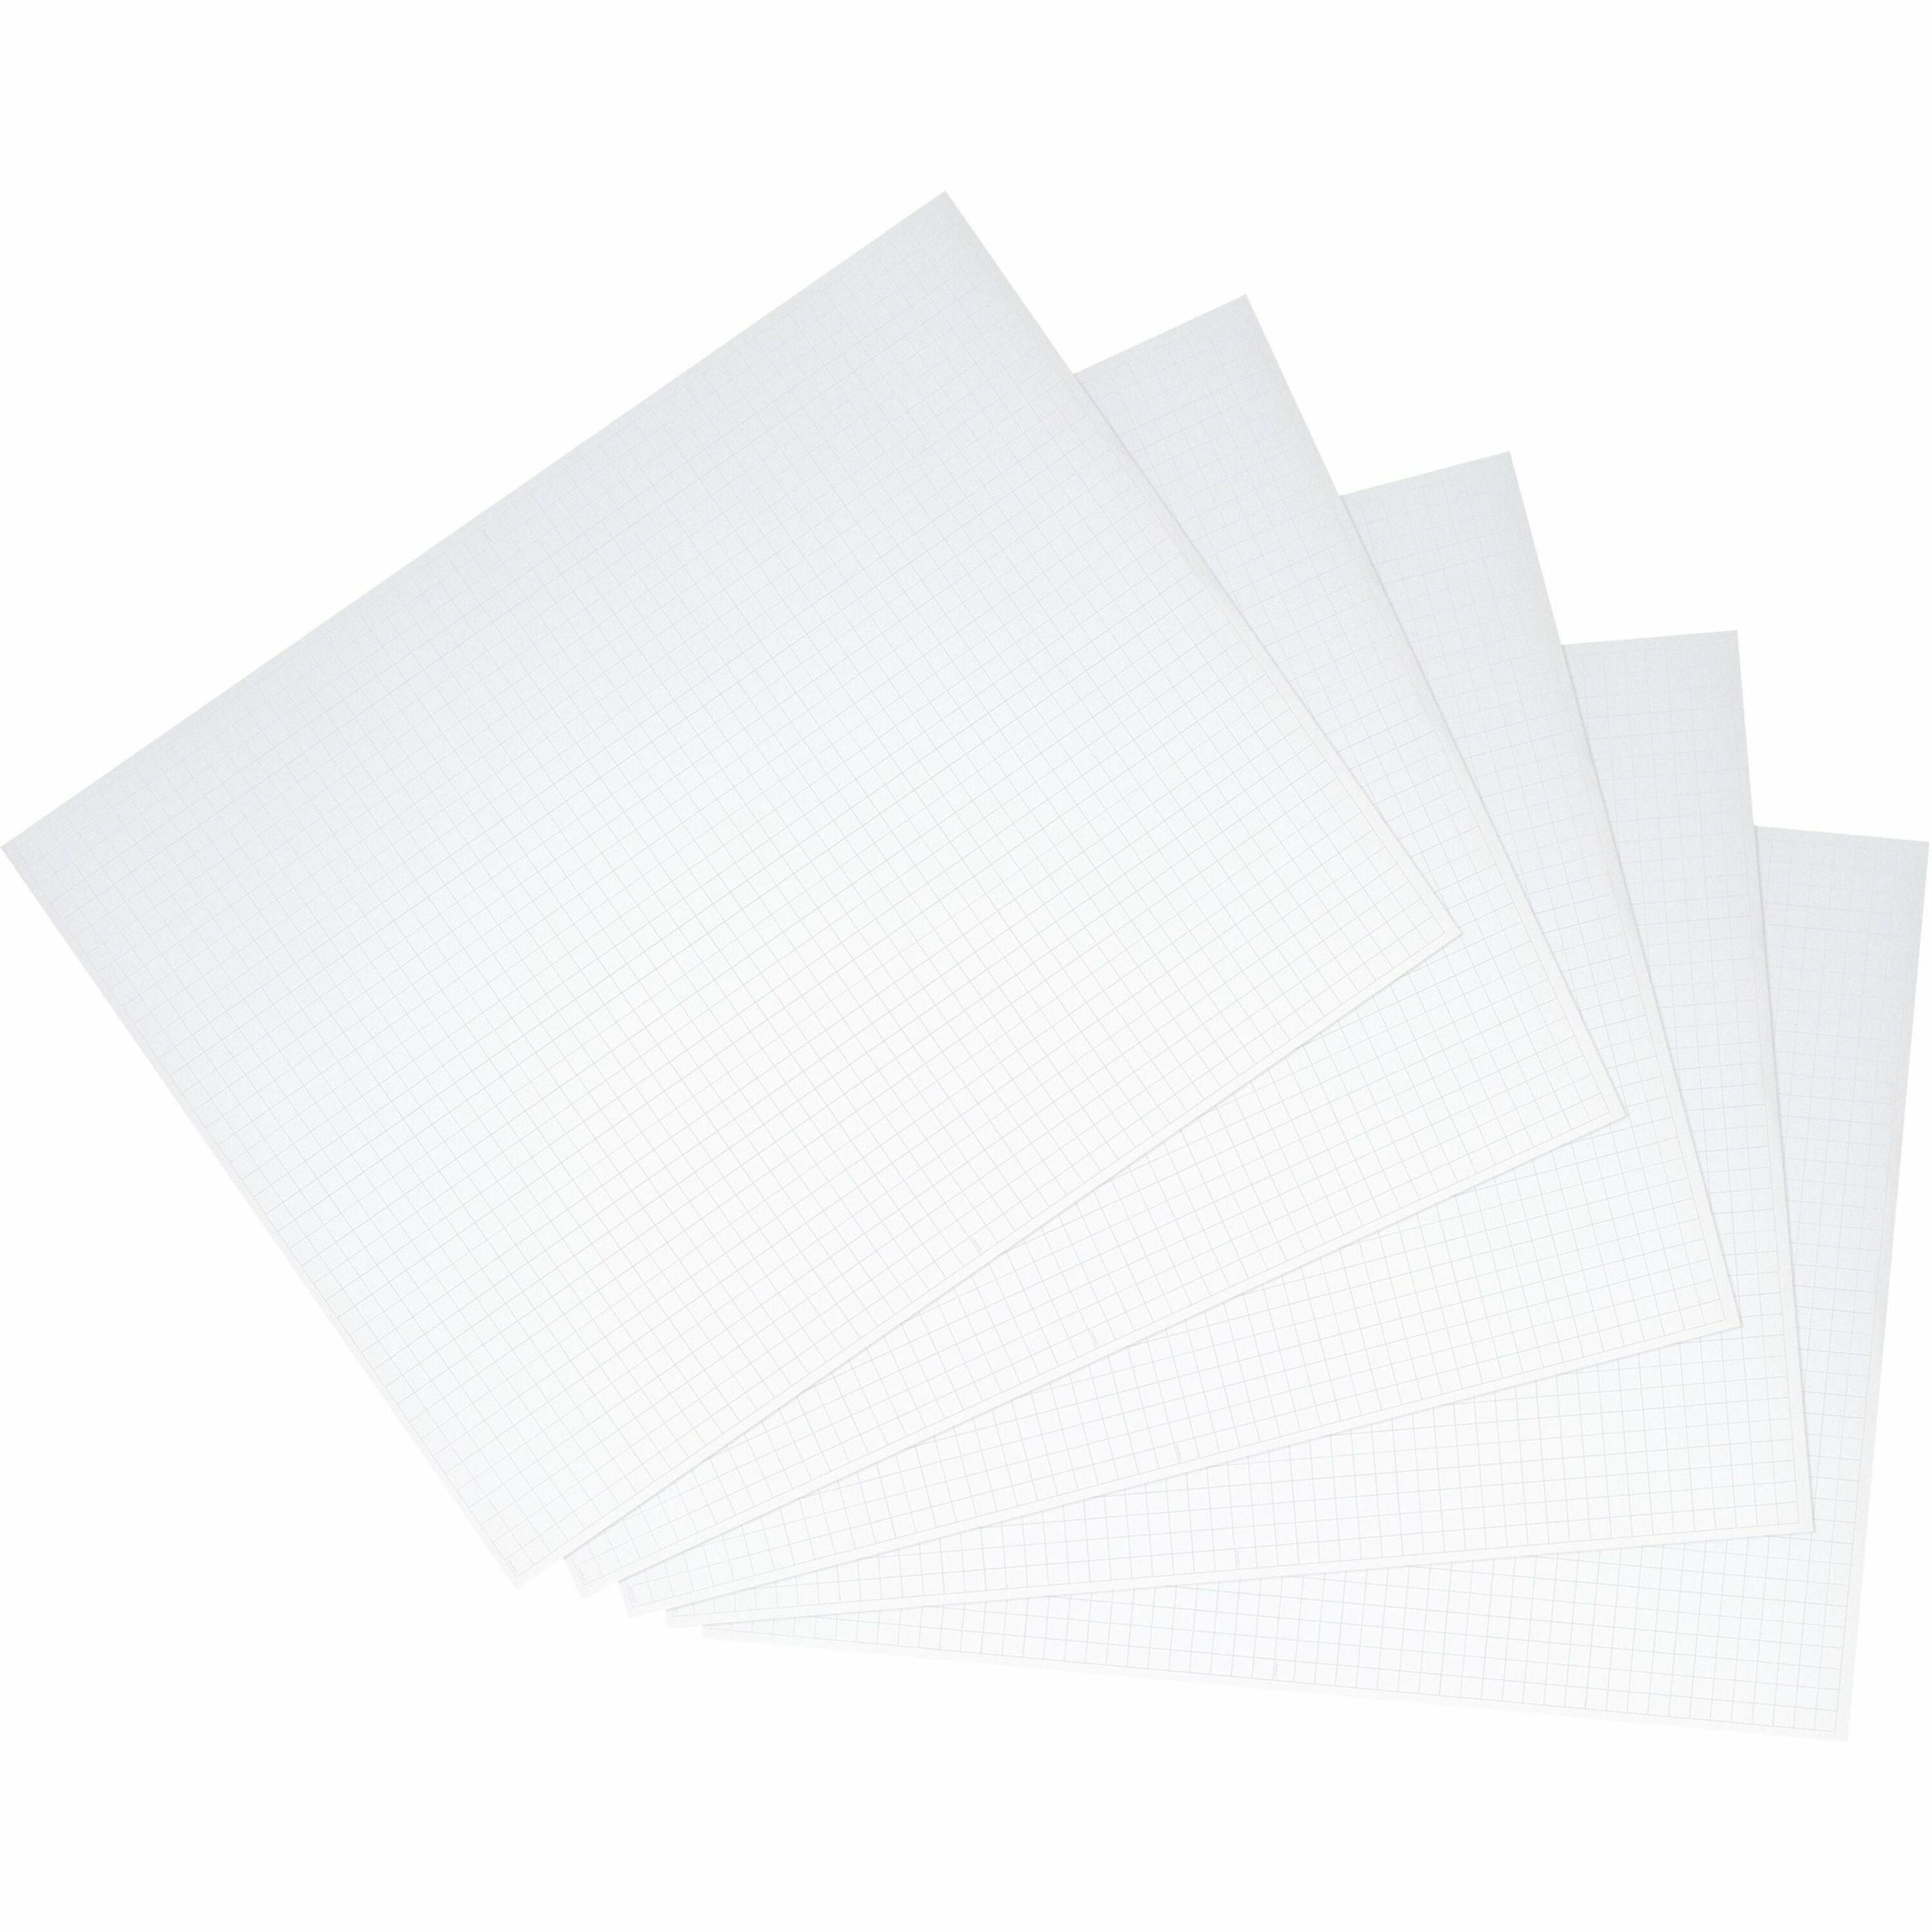 ucreate-faint-1-2-grid-foam-board-chart-wood-graph-decoration-home-art-office-craft-school-project-mounting-display--x-22width-x-1875-milthickness-x-28length-5-carton-white-foam-polystyrene_paccar90330k - 1